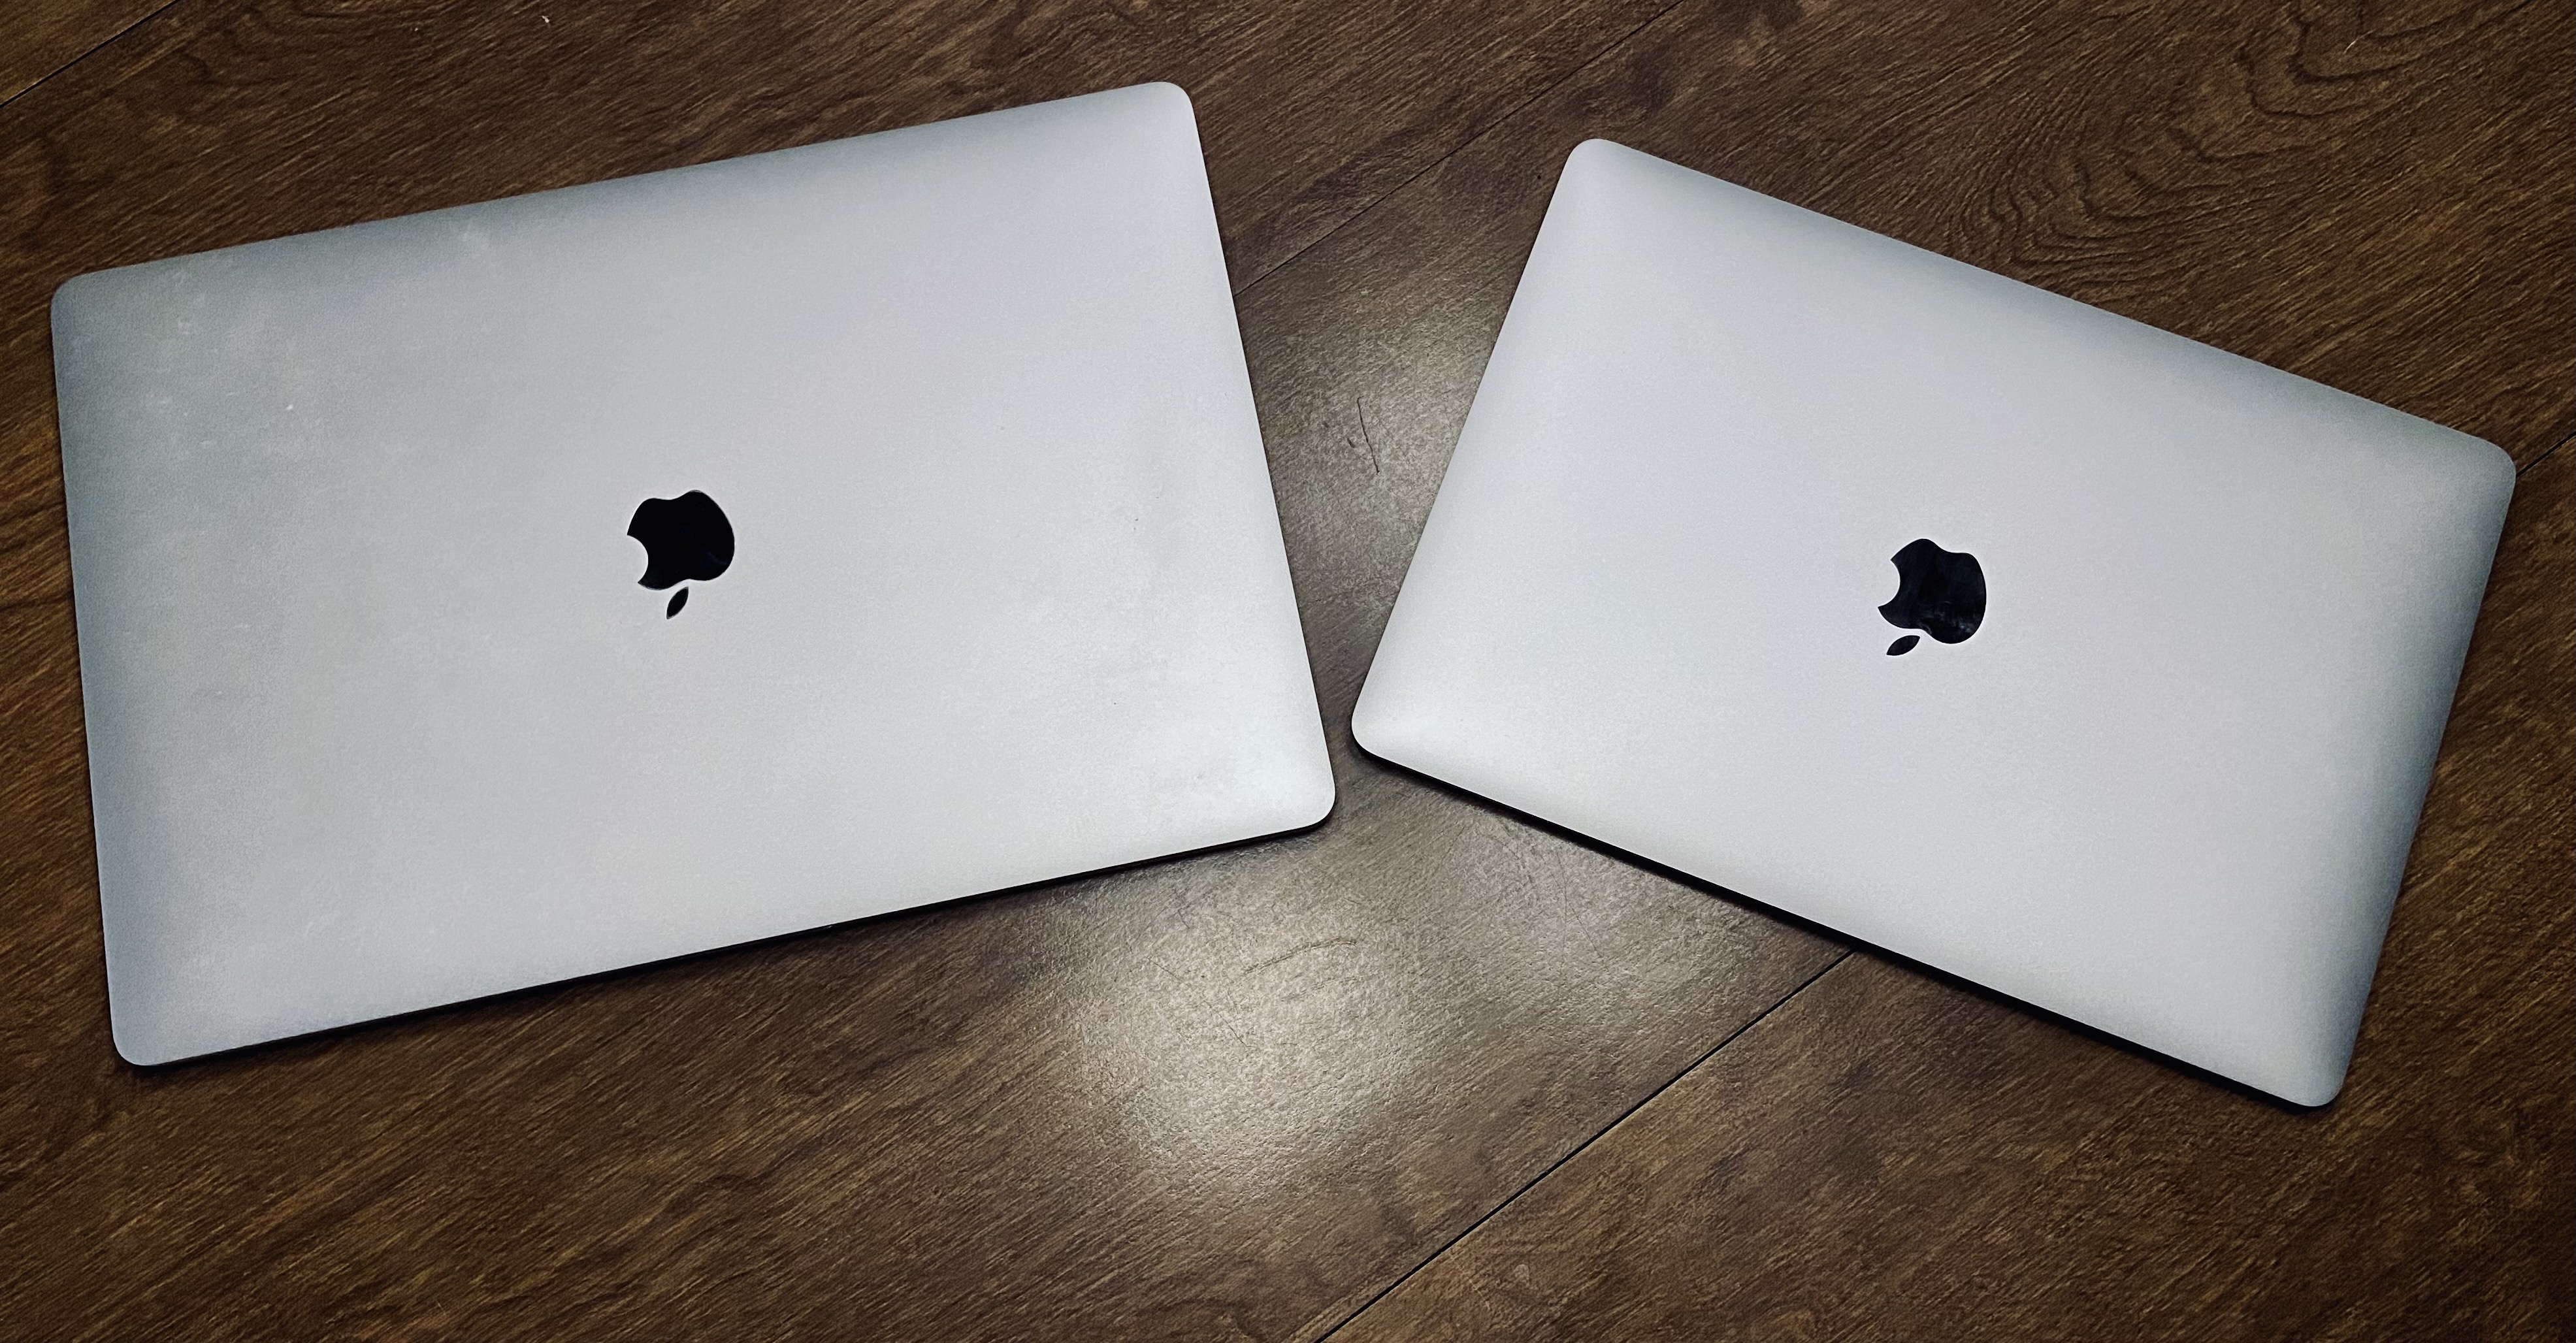 Both Macs, closed on table